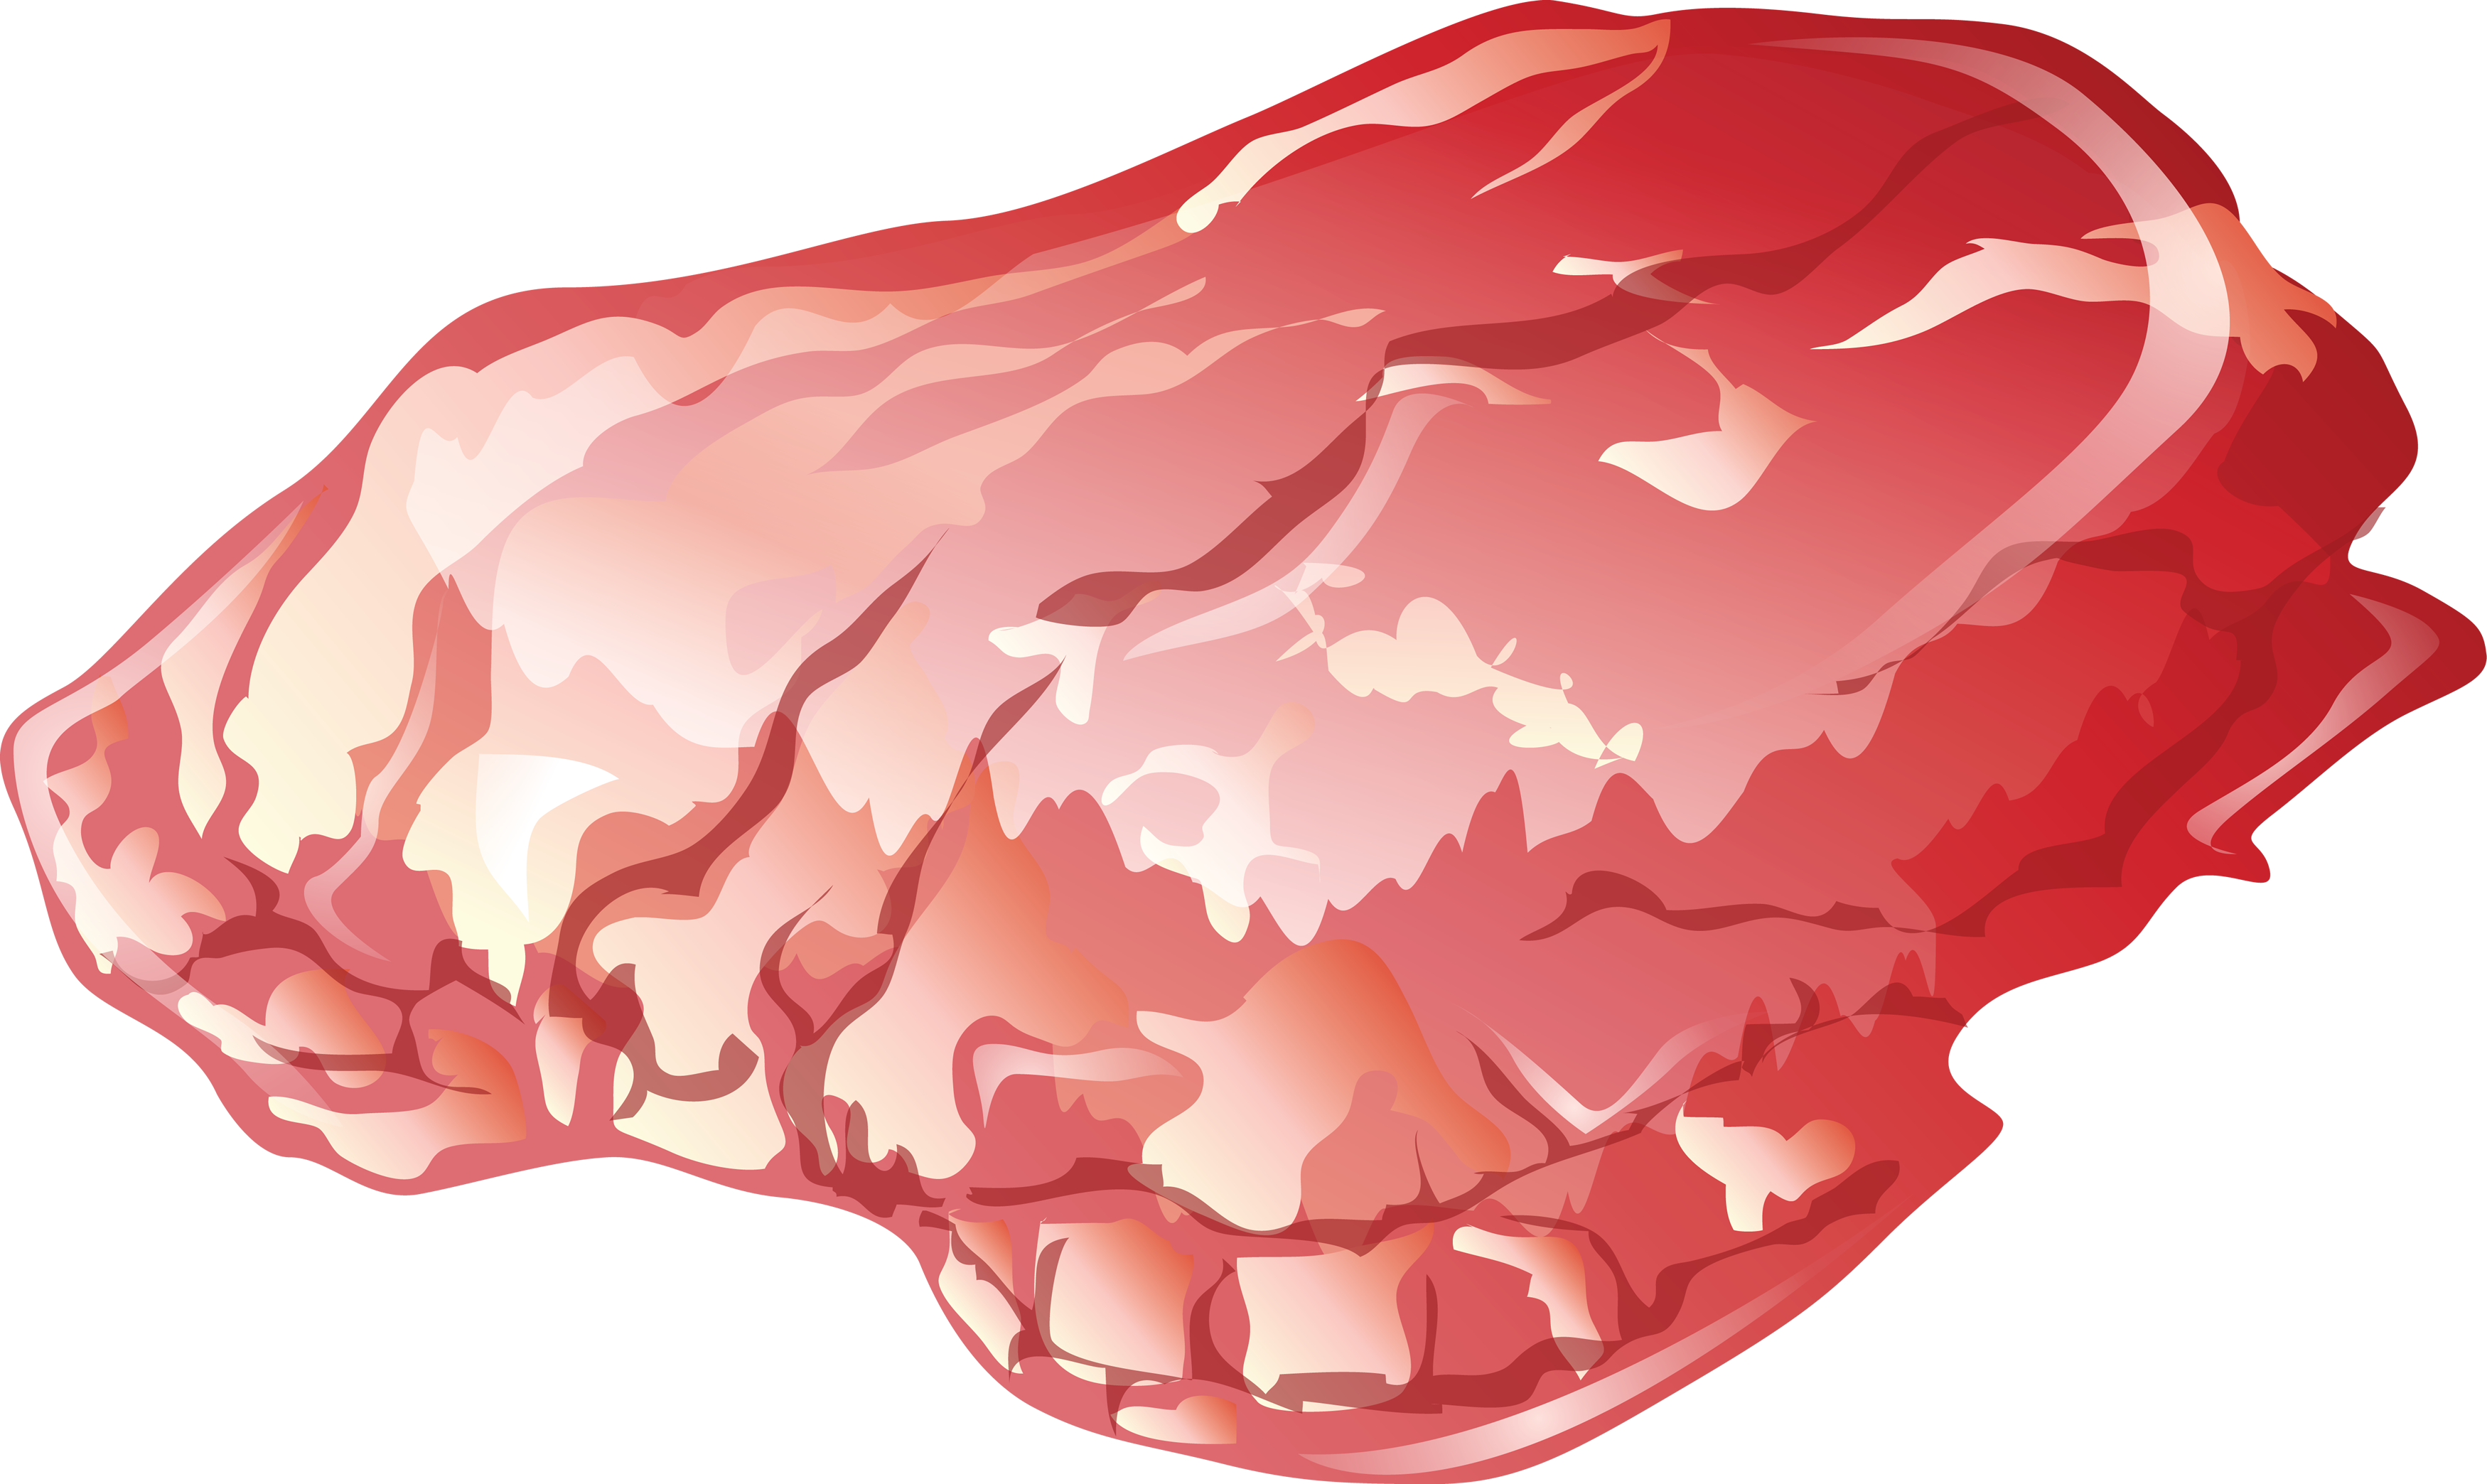 Meat clipart sandwich meat. Png image free download